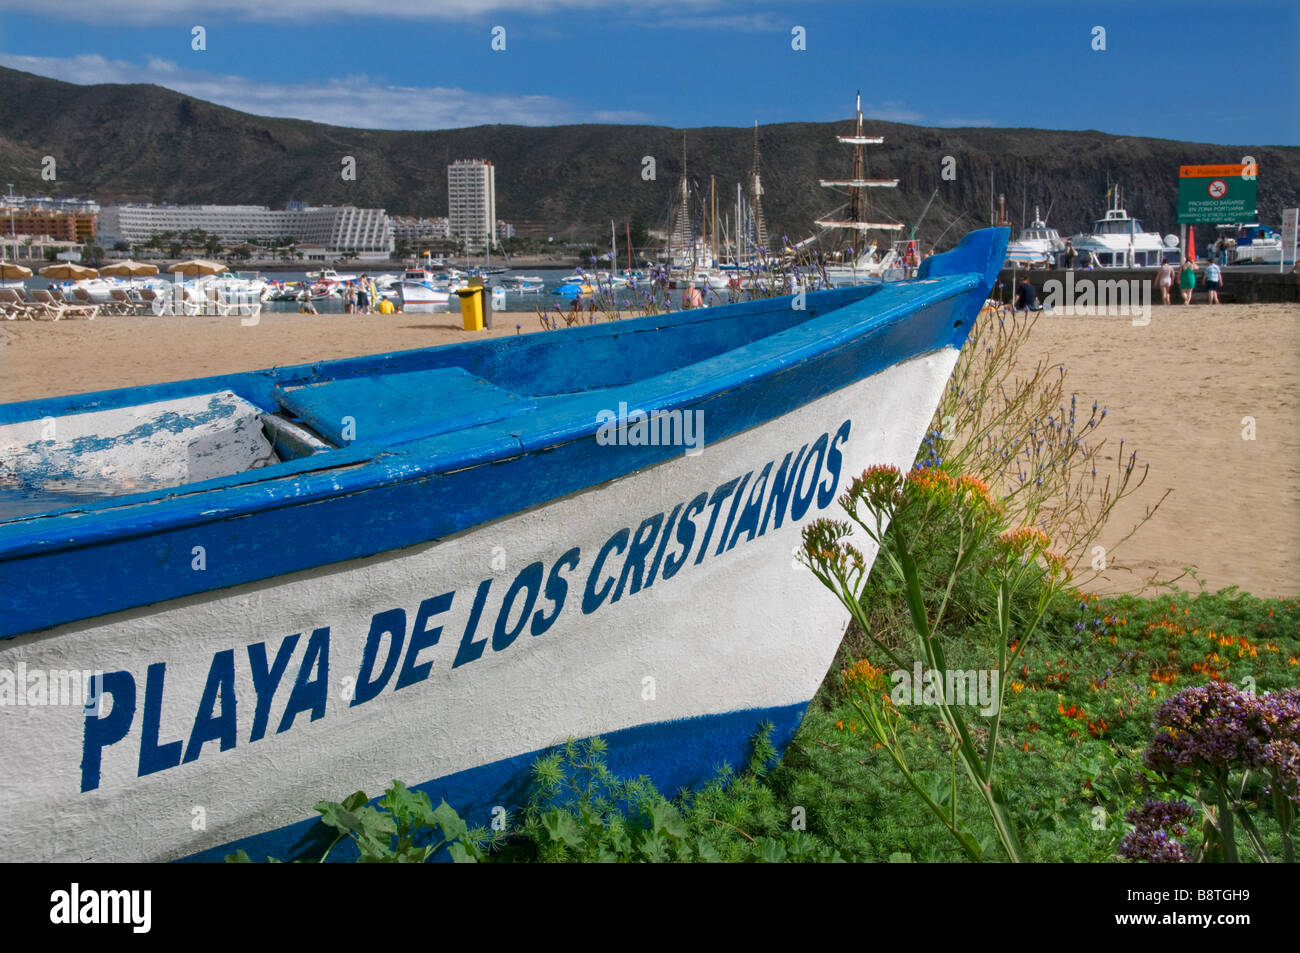 Feature traditional wooden fishing boat named 'Playa Los Cristianos' lying on Los Cristianos beach Tenerife Canary Islands Spain Stock Photo